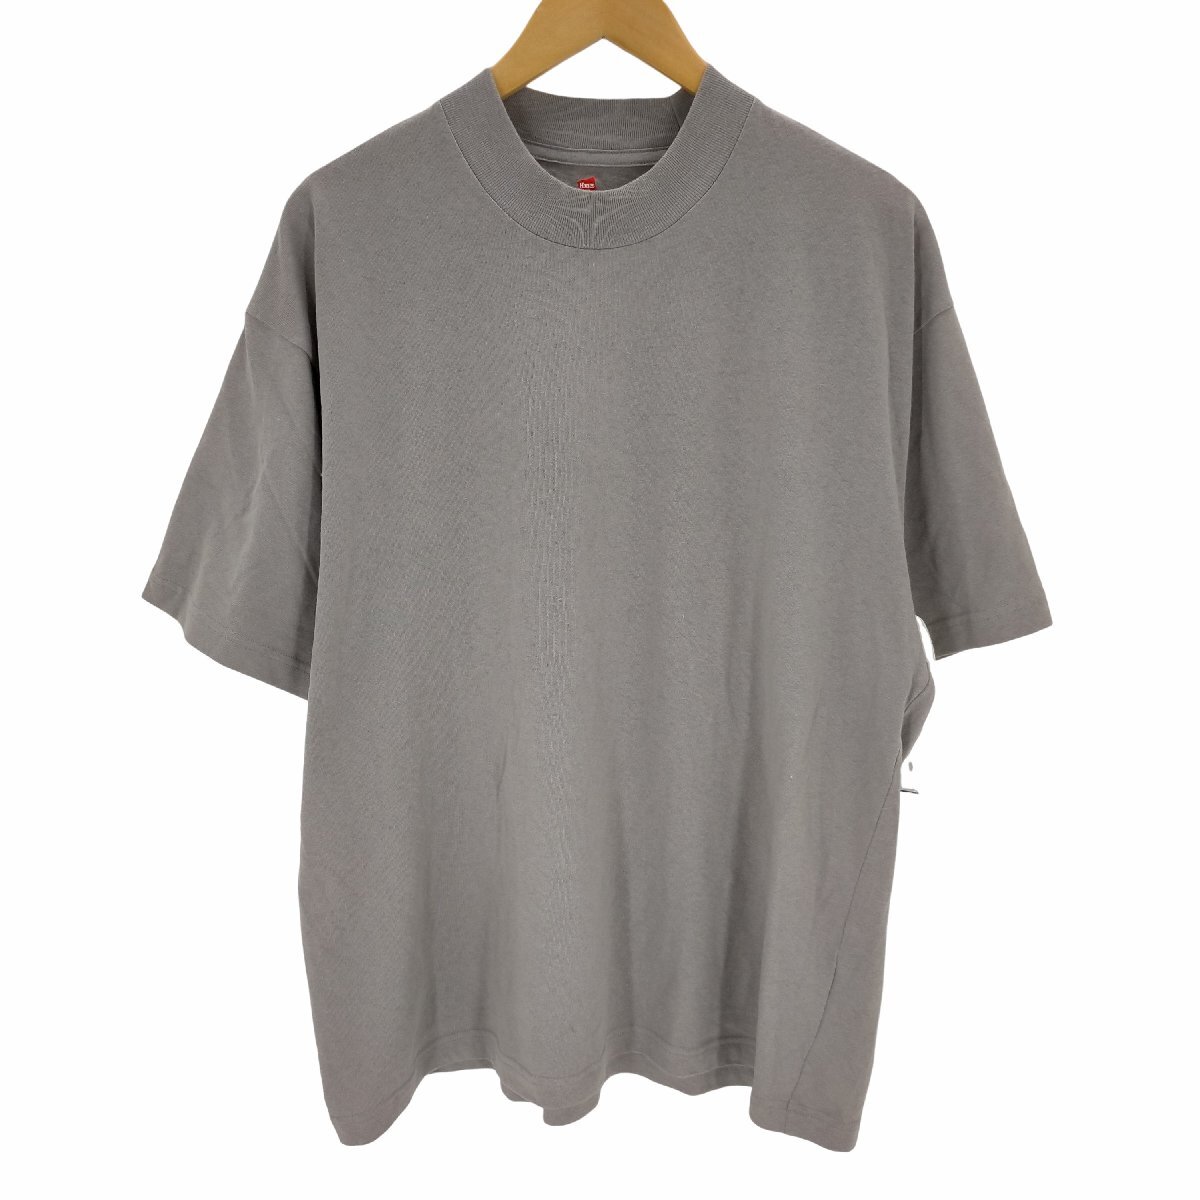 Biotop(ビオトープ) RECYCLE COTTON MOCK NECK T-SHIRTS メンズ 中古 古着 0742_画像1